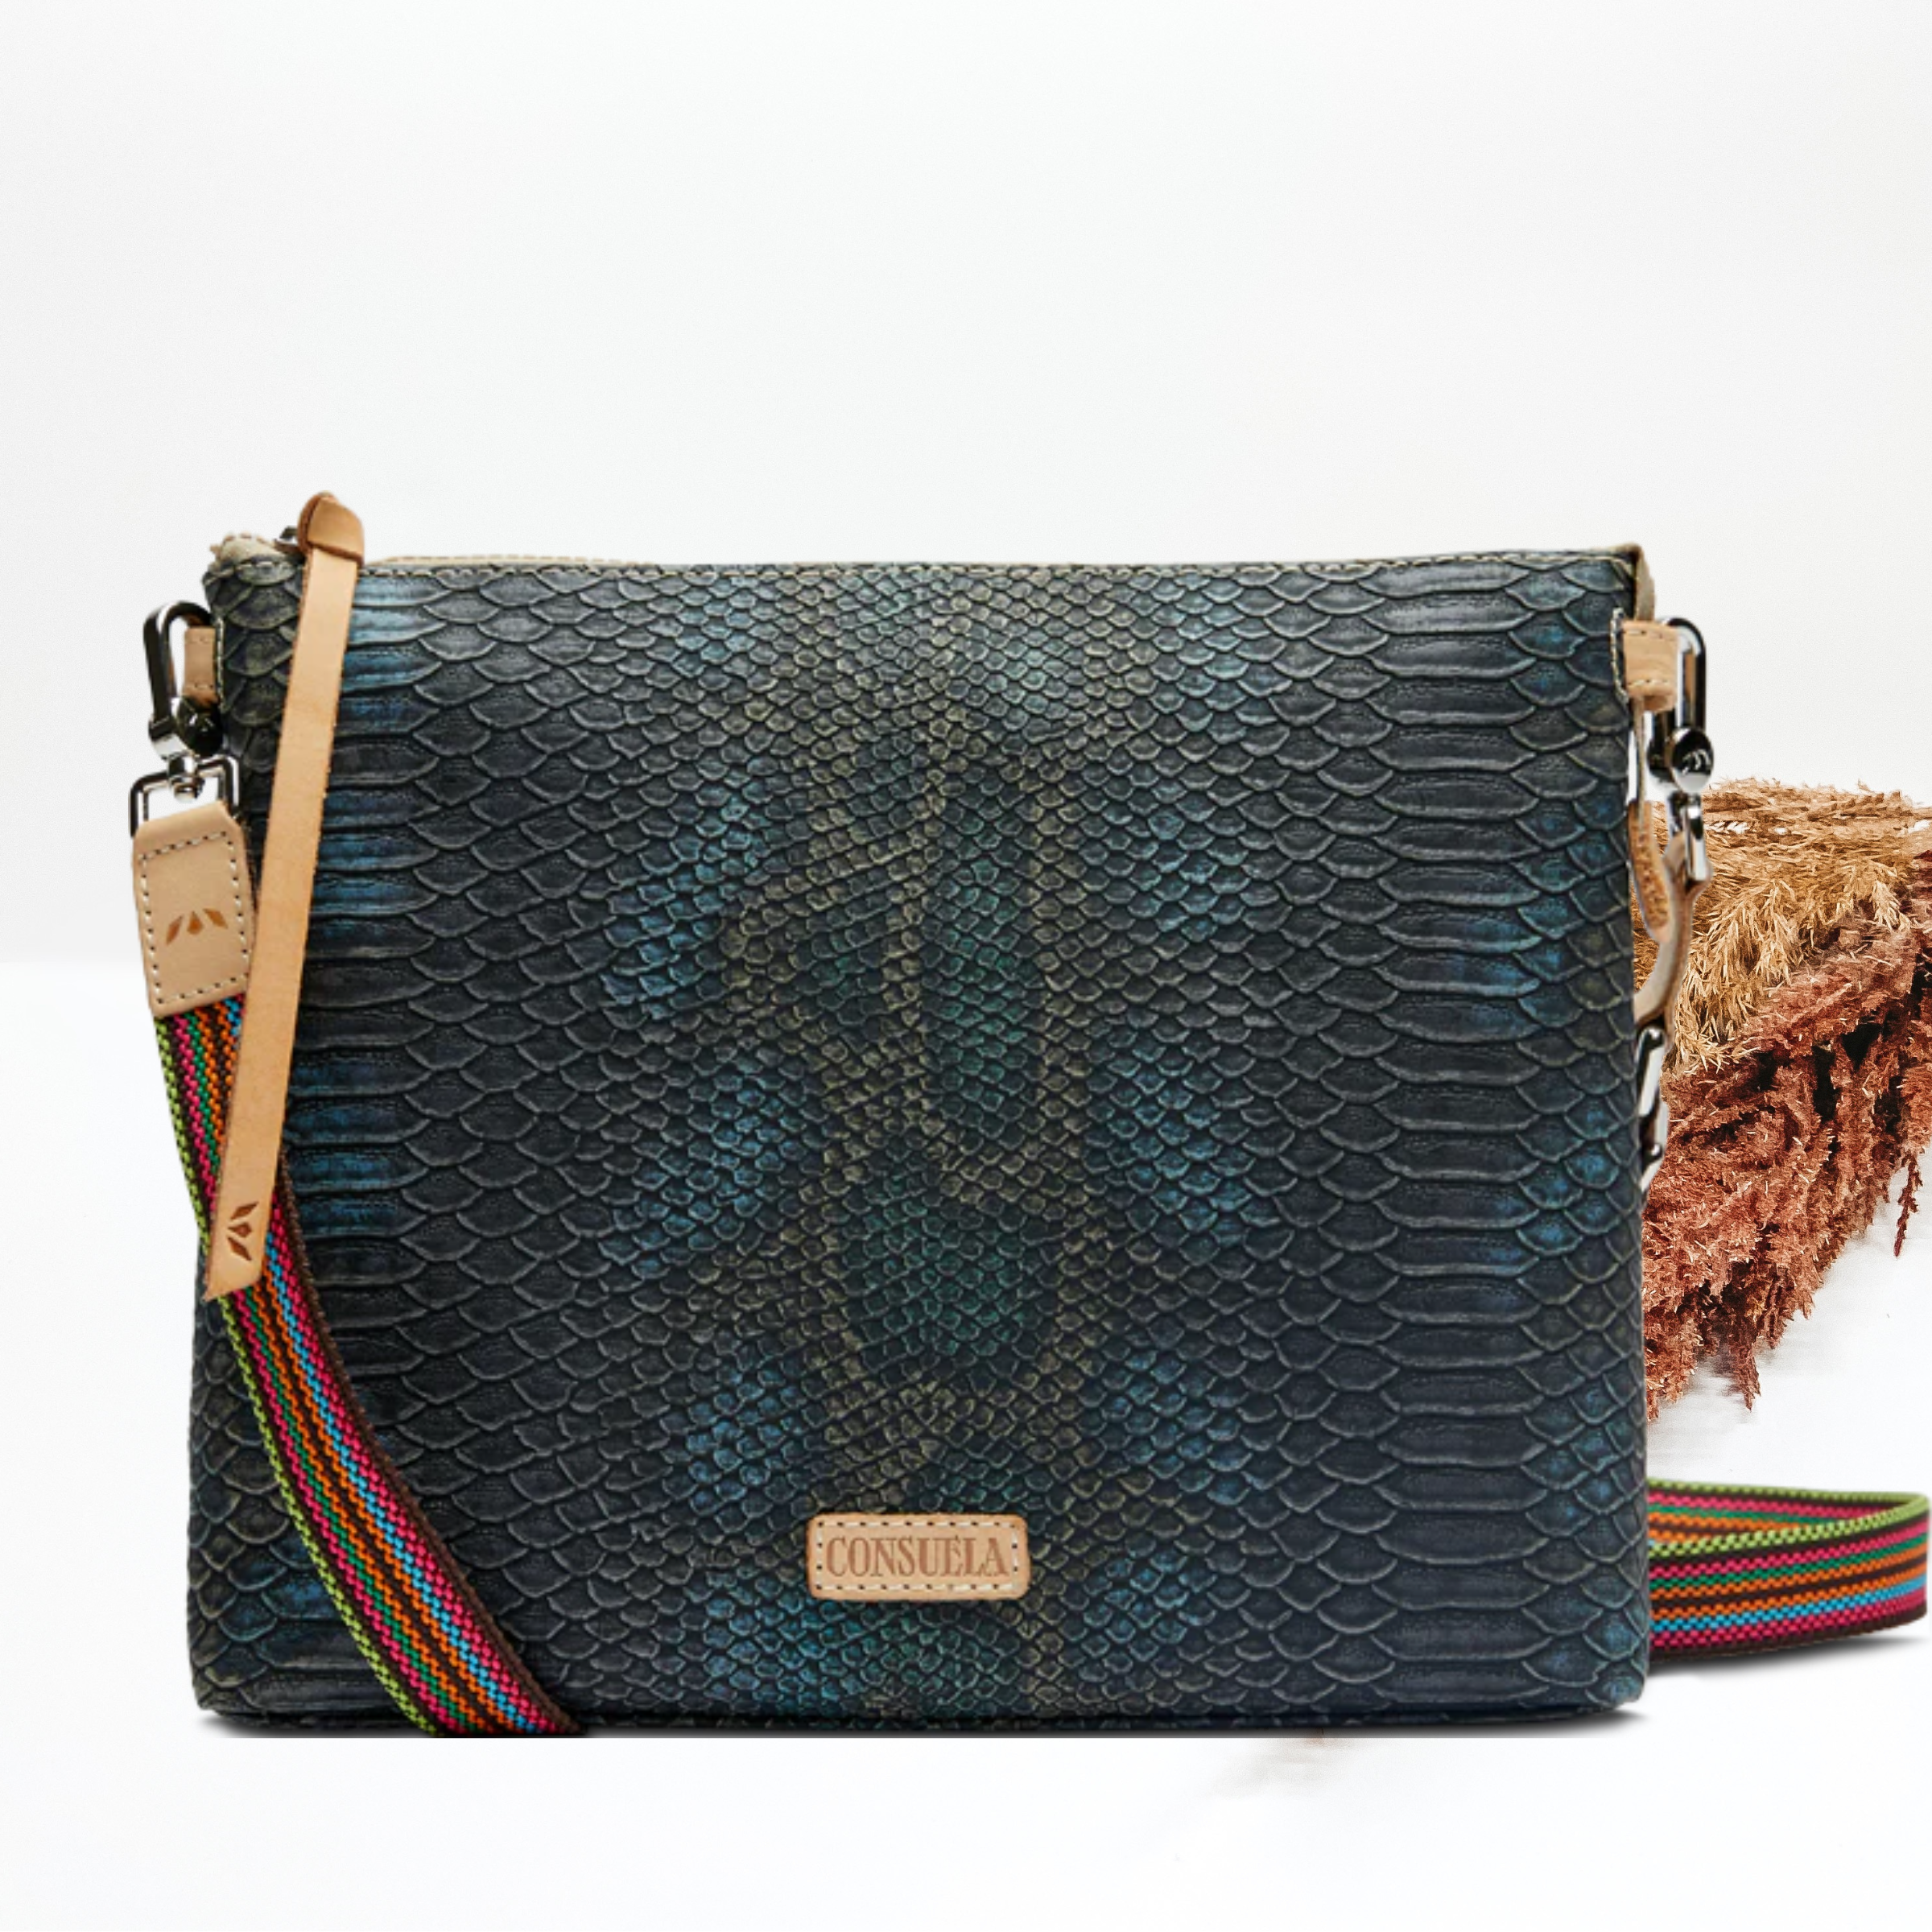 A black and blue snake print purse with a crossbody strap. Pictured on white background with brown pompous grass on the right side. 